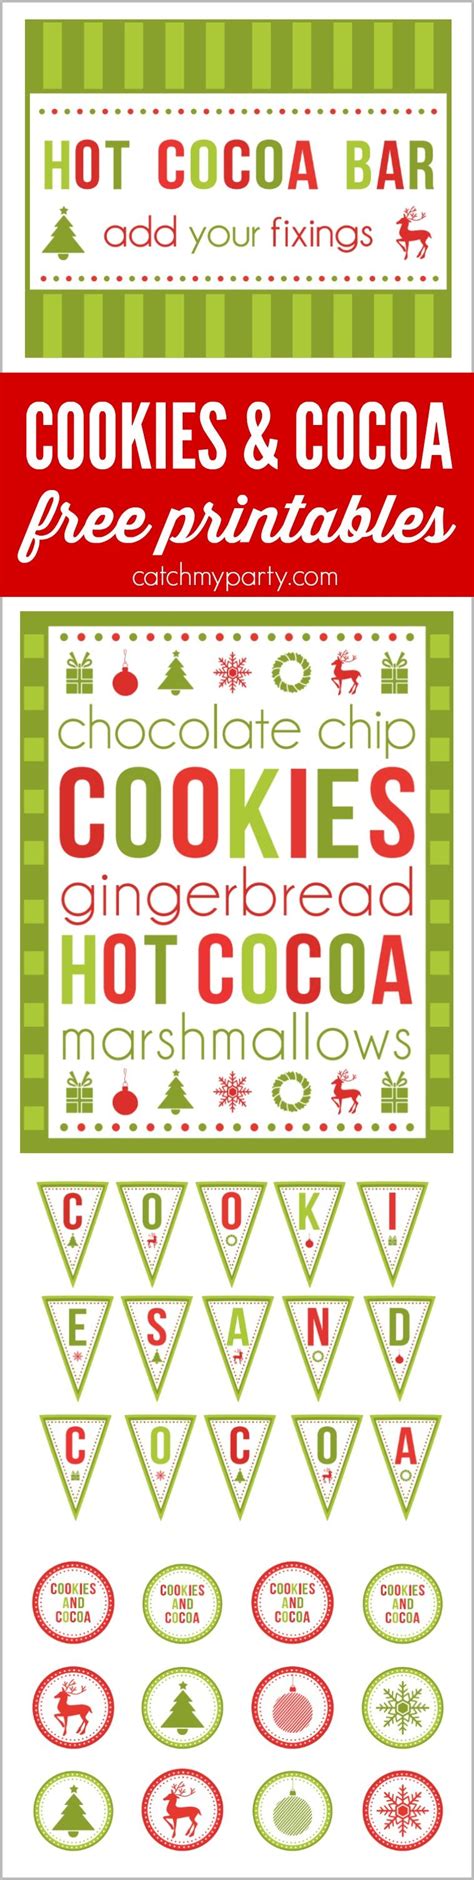 Cookies And Cocoa Invitations Free Printables
